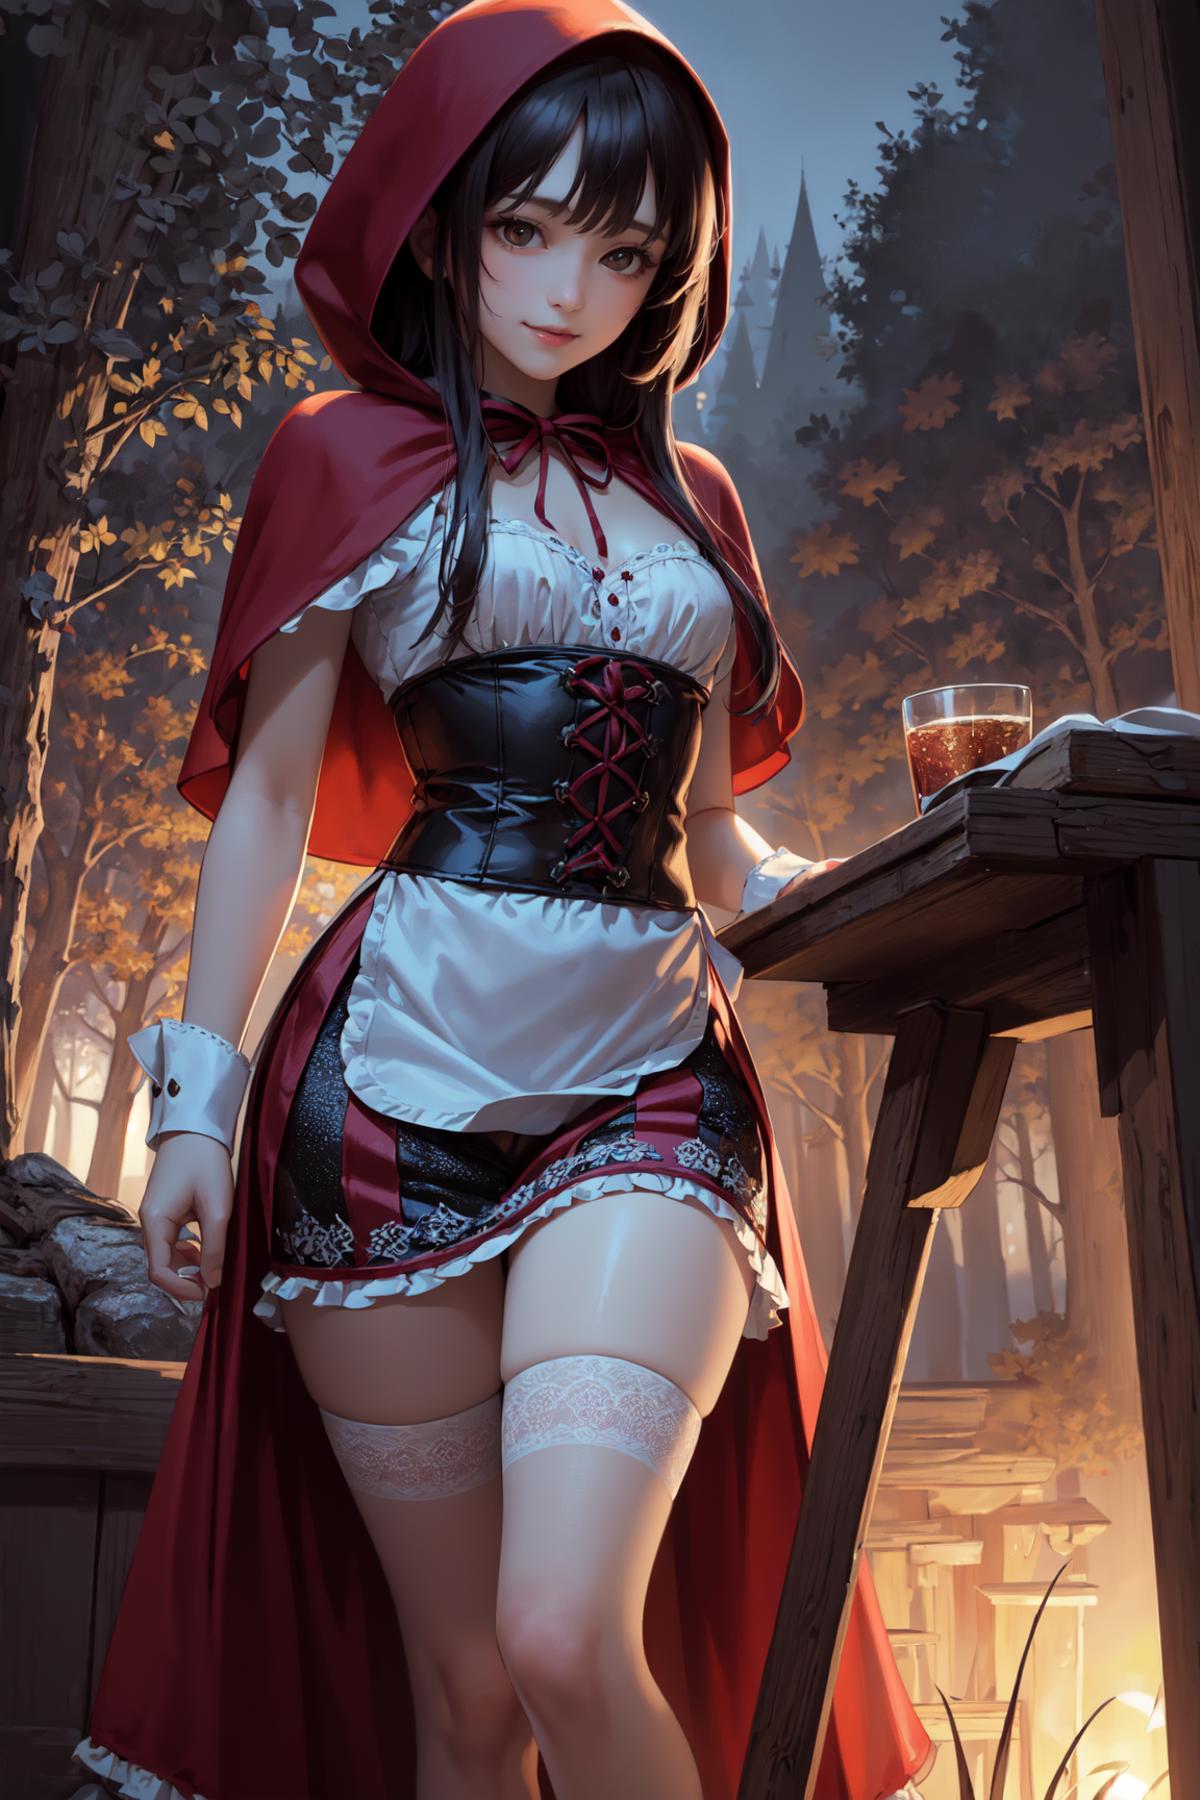 Little red riding hood image by pizzagirl